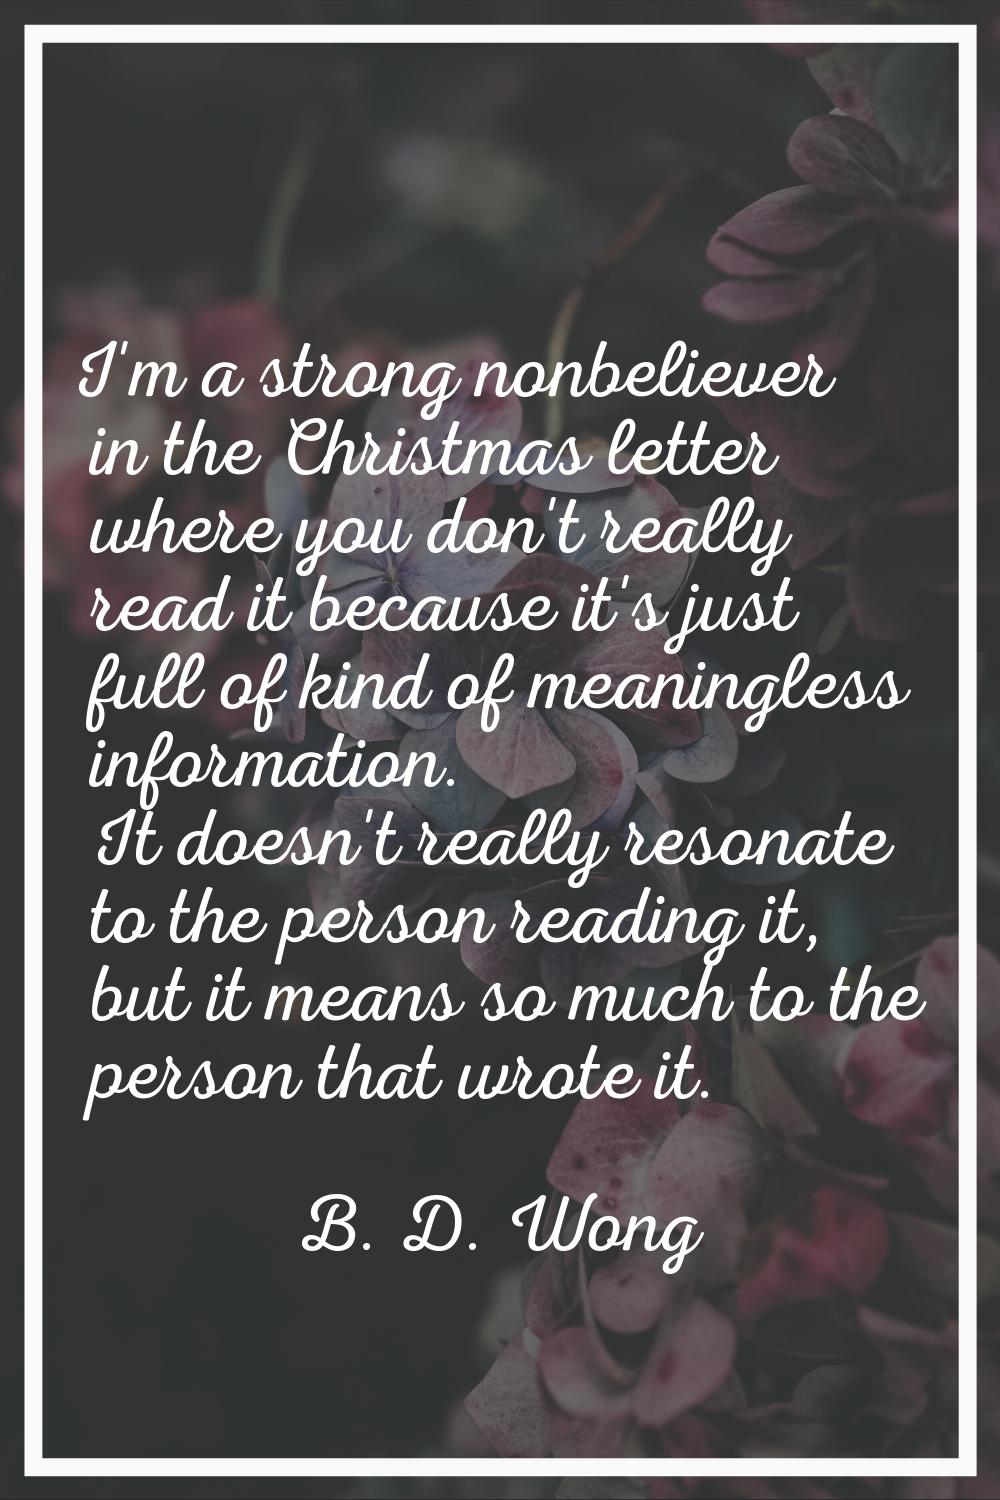 I'm a strong nonbeliever in the Christmas letter where you don't really read it because it's just f